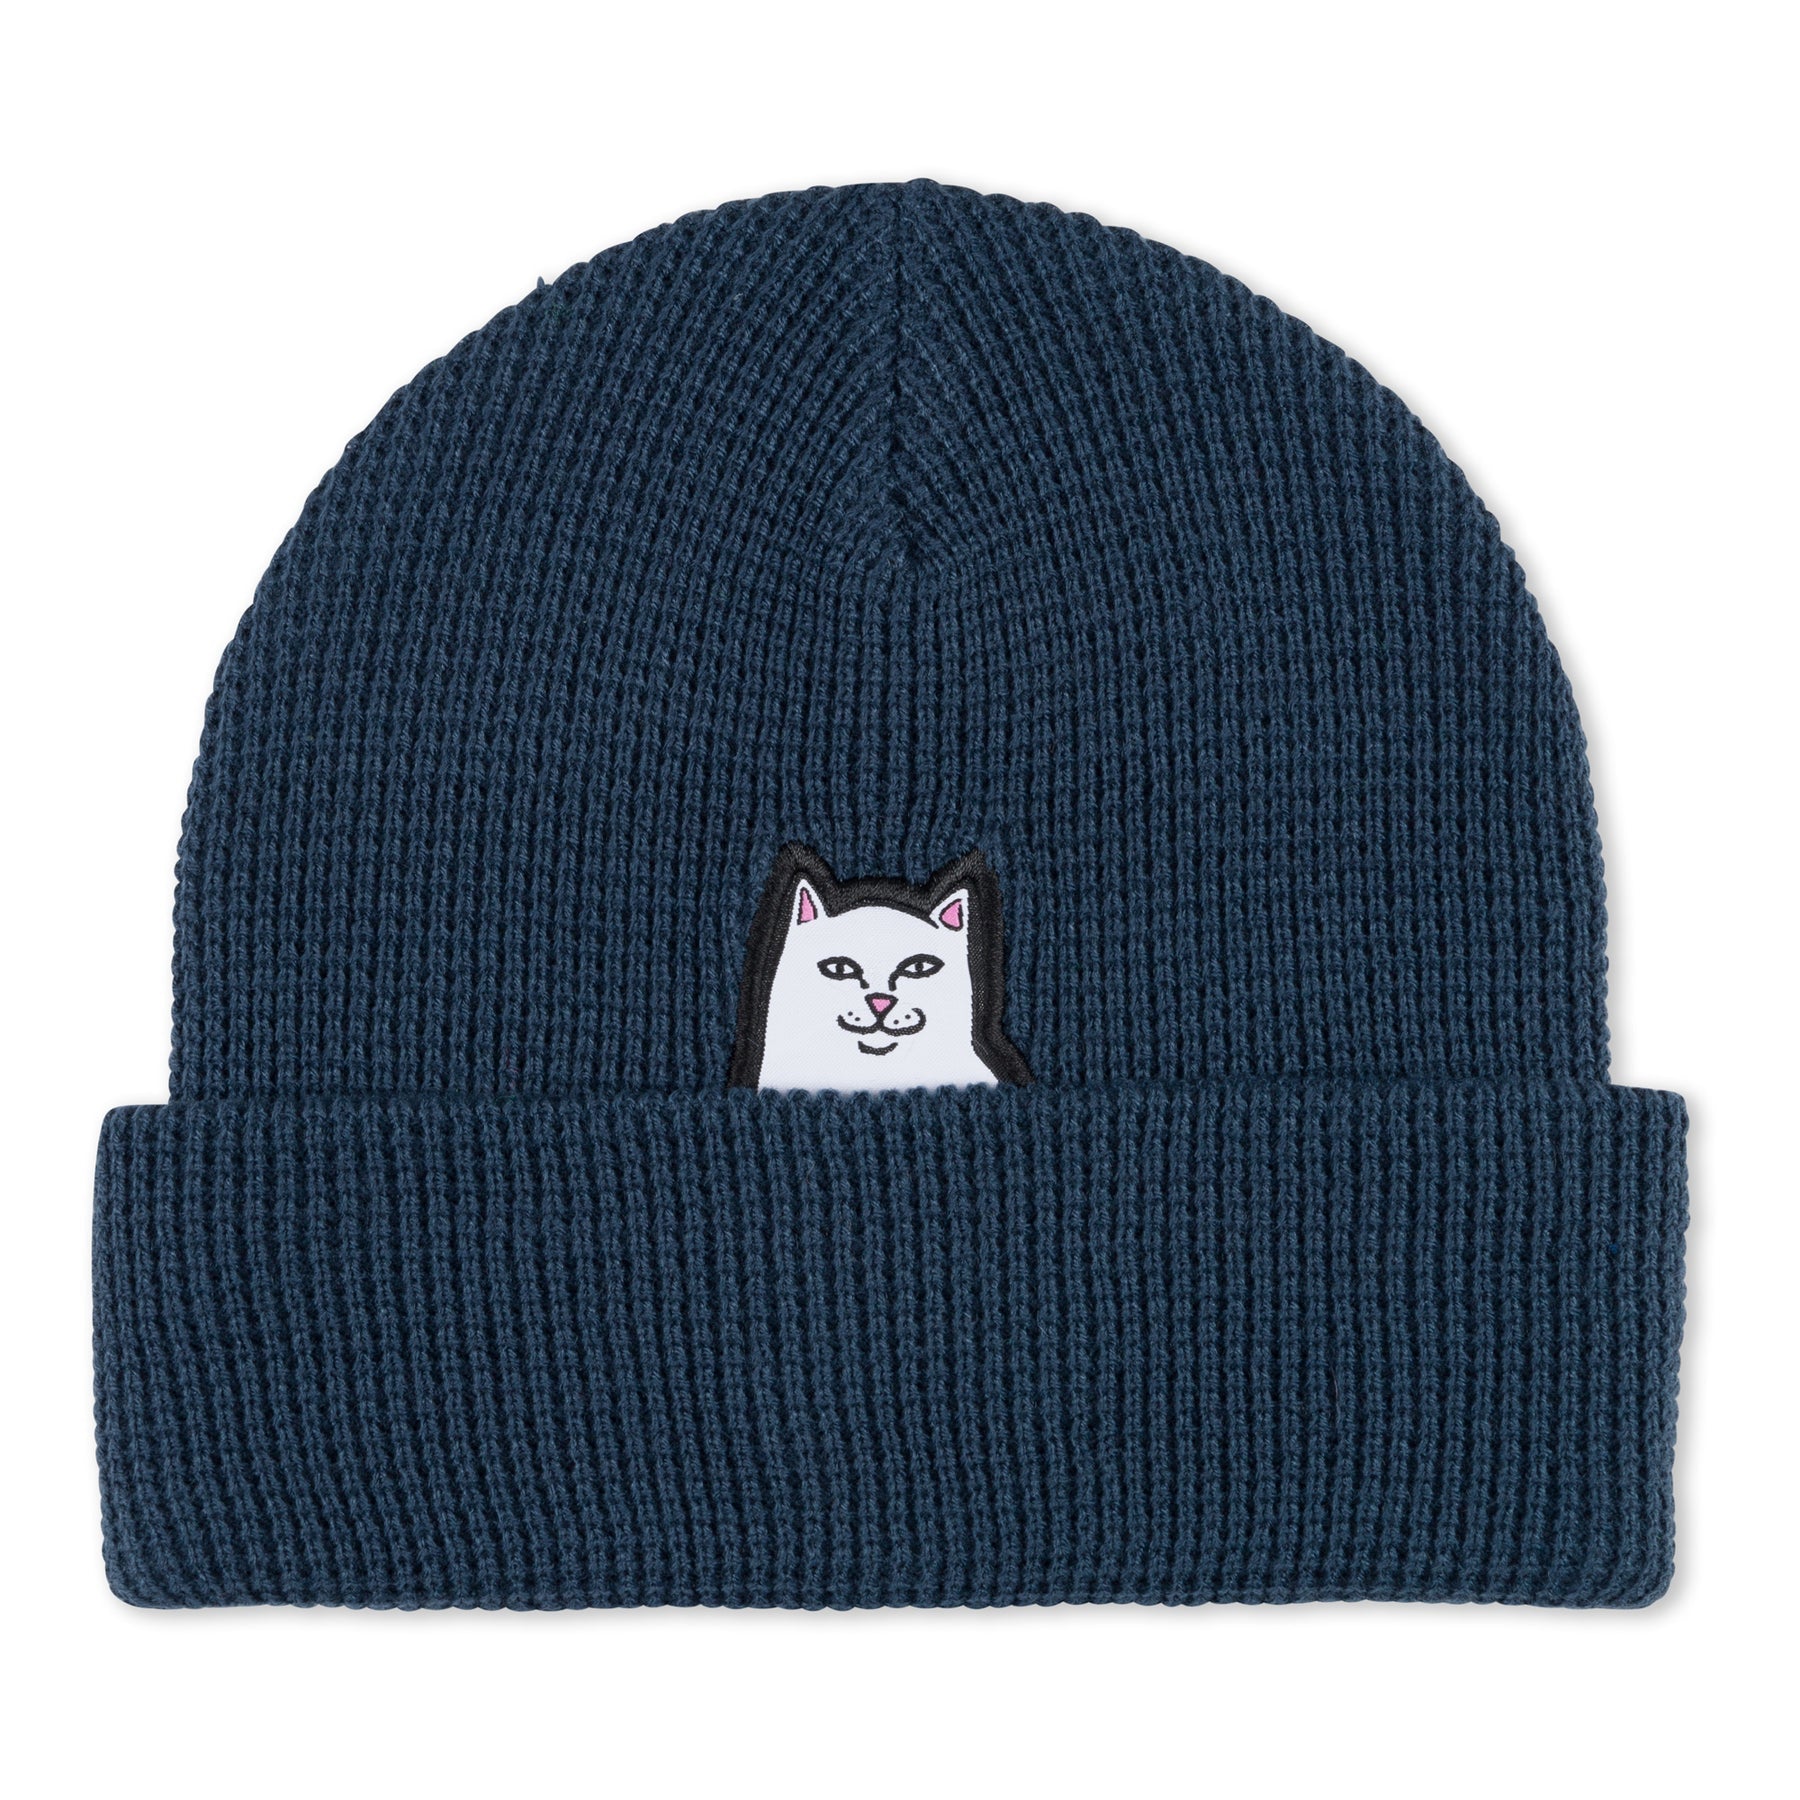 Lord Nermal Waffle Knit Beanie (Navy)